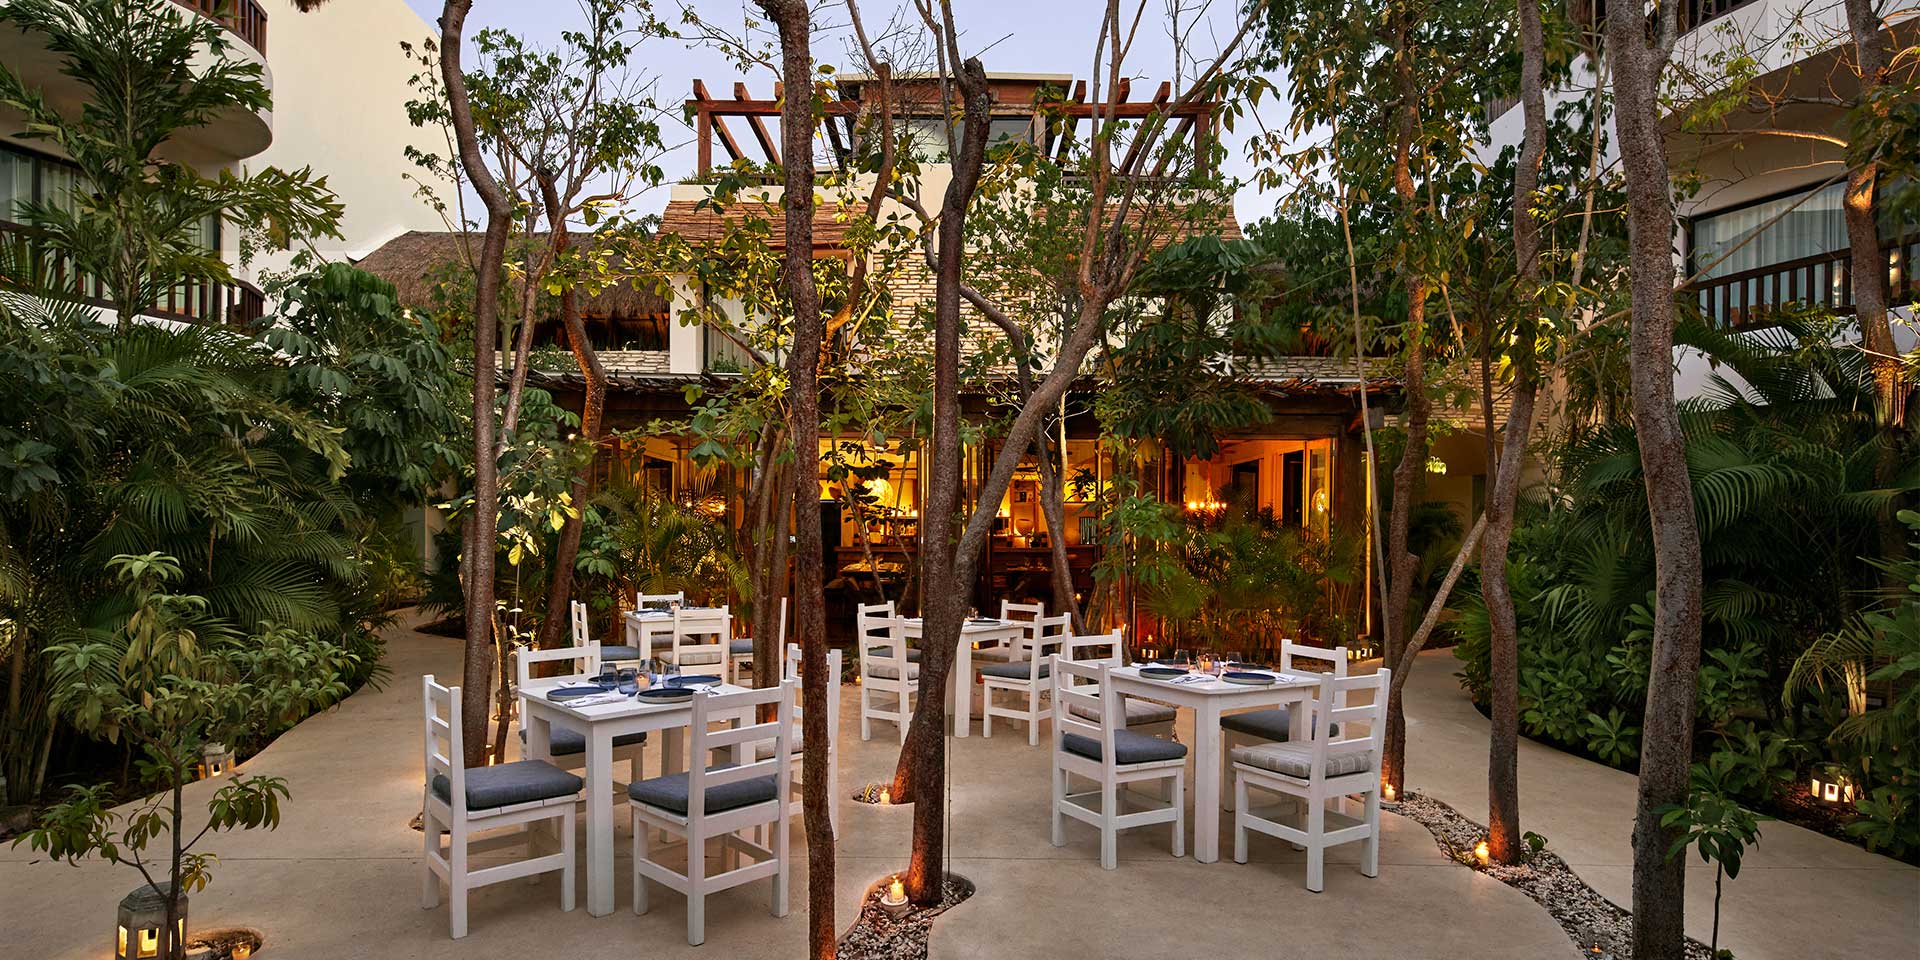 Enjoy a diner at this restaurant in the rooftop of a Tulum hotel